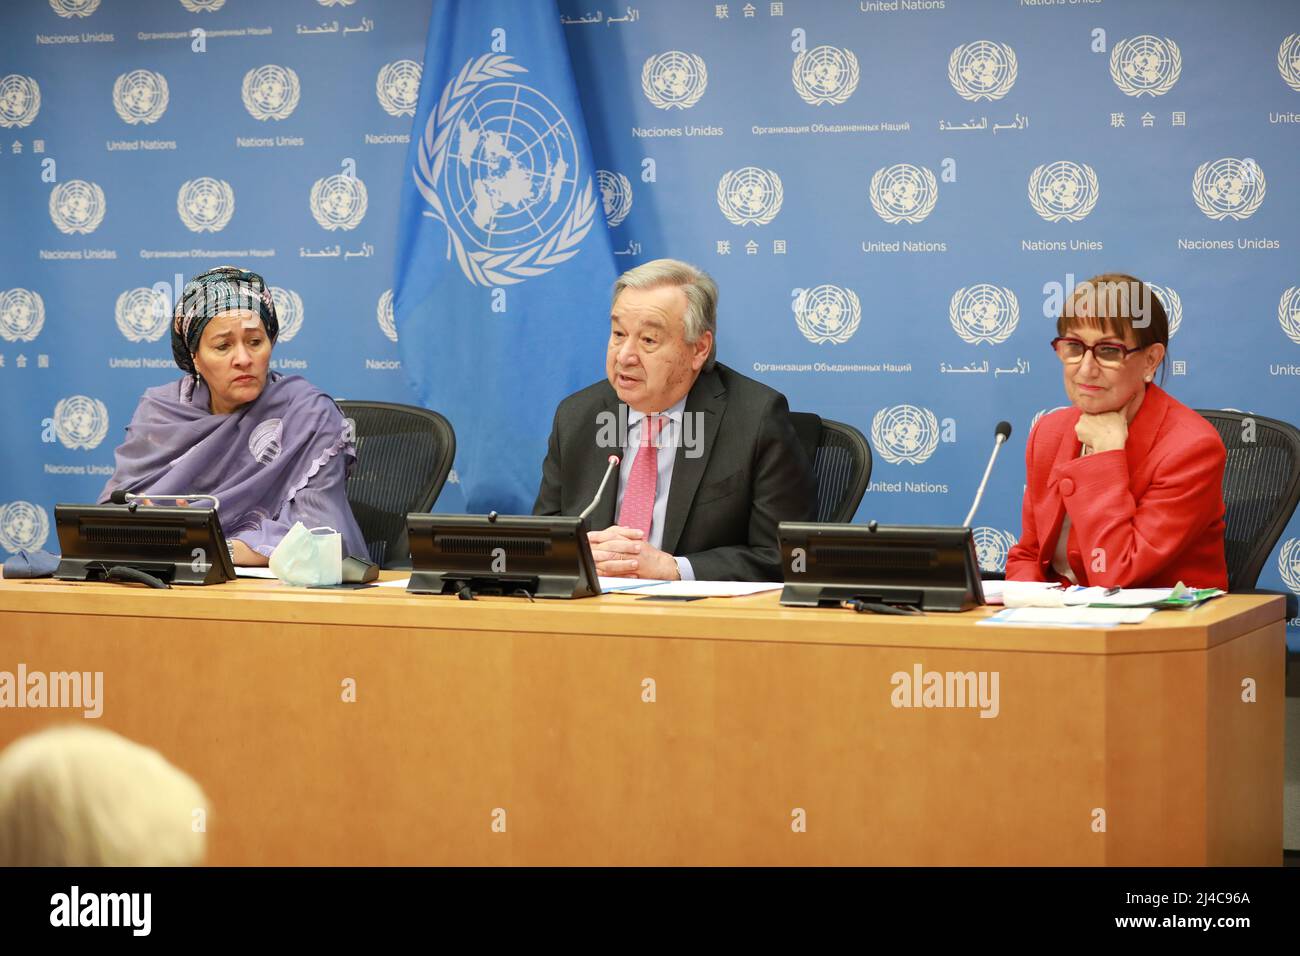 (220414) -- UNITED NATIONS, April 14, 2022 (Xinhua) -- UN Secretary-General Antonio Guterres (C) speaks to the media at the launch of a report by Global Crisis Response Group on Food, Energy and Finance over the Ukraine crisis, at the UN headquarters in New York, April 13, 2022. UN Secretary-General Antonio Guterres said Wednesday that a nationwide humanitarian cease-fire in Ukraine seems to be out of reach at the moment. Guterres on March 28 launched an initiative for a humanitarian cease-fire in Ukraine and sent Undersecretary-General for Humanitarian Affairs Martin Griffiths to Moscow and Stock Photo